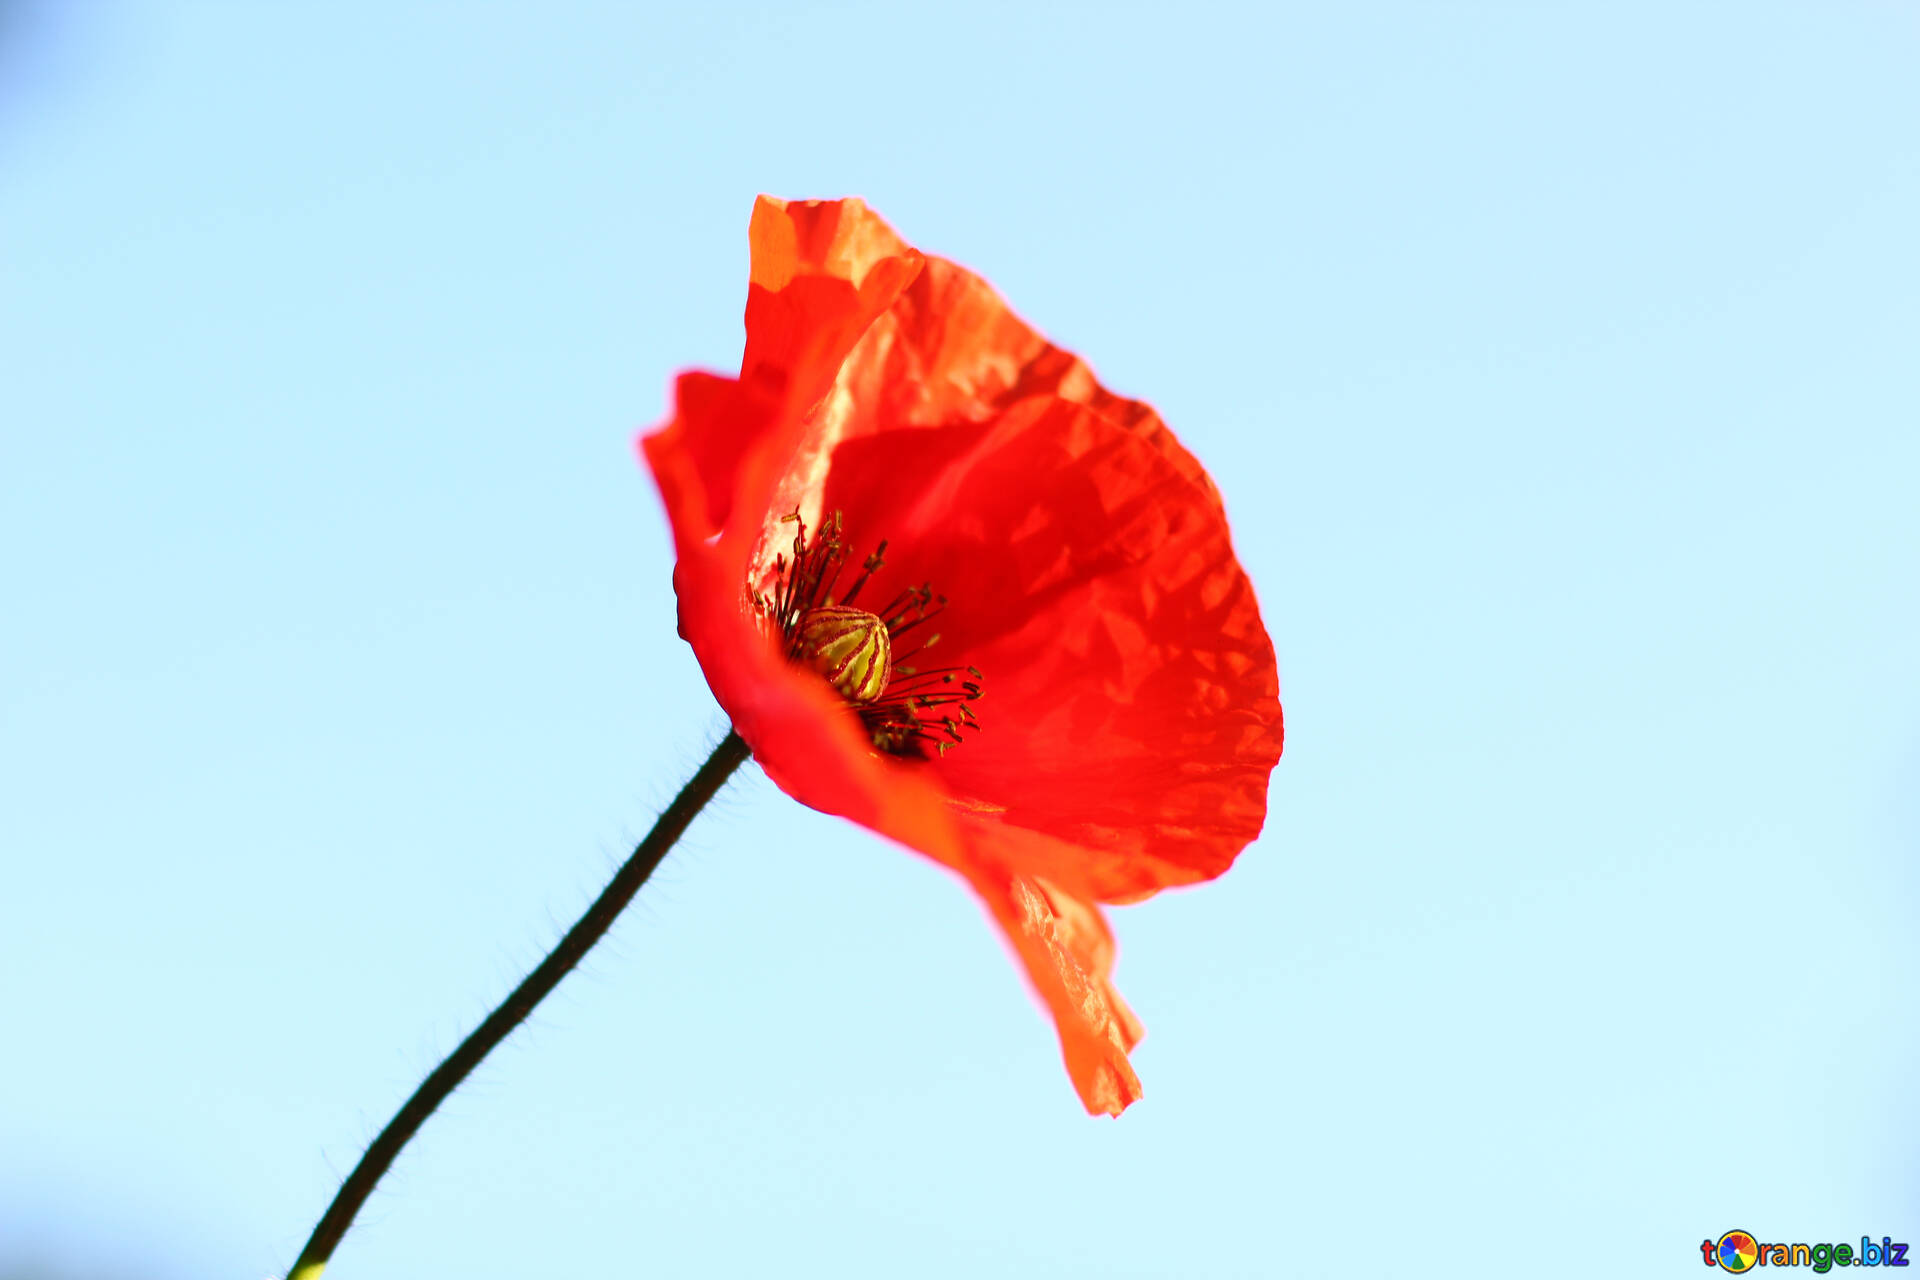 Flowers poppy on a background of the sky image red poppy flower on blue  background images poppy № 37038  ~ free pics on cc-by license